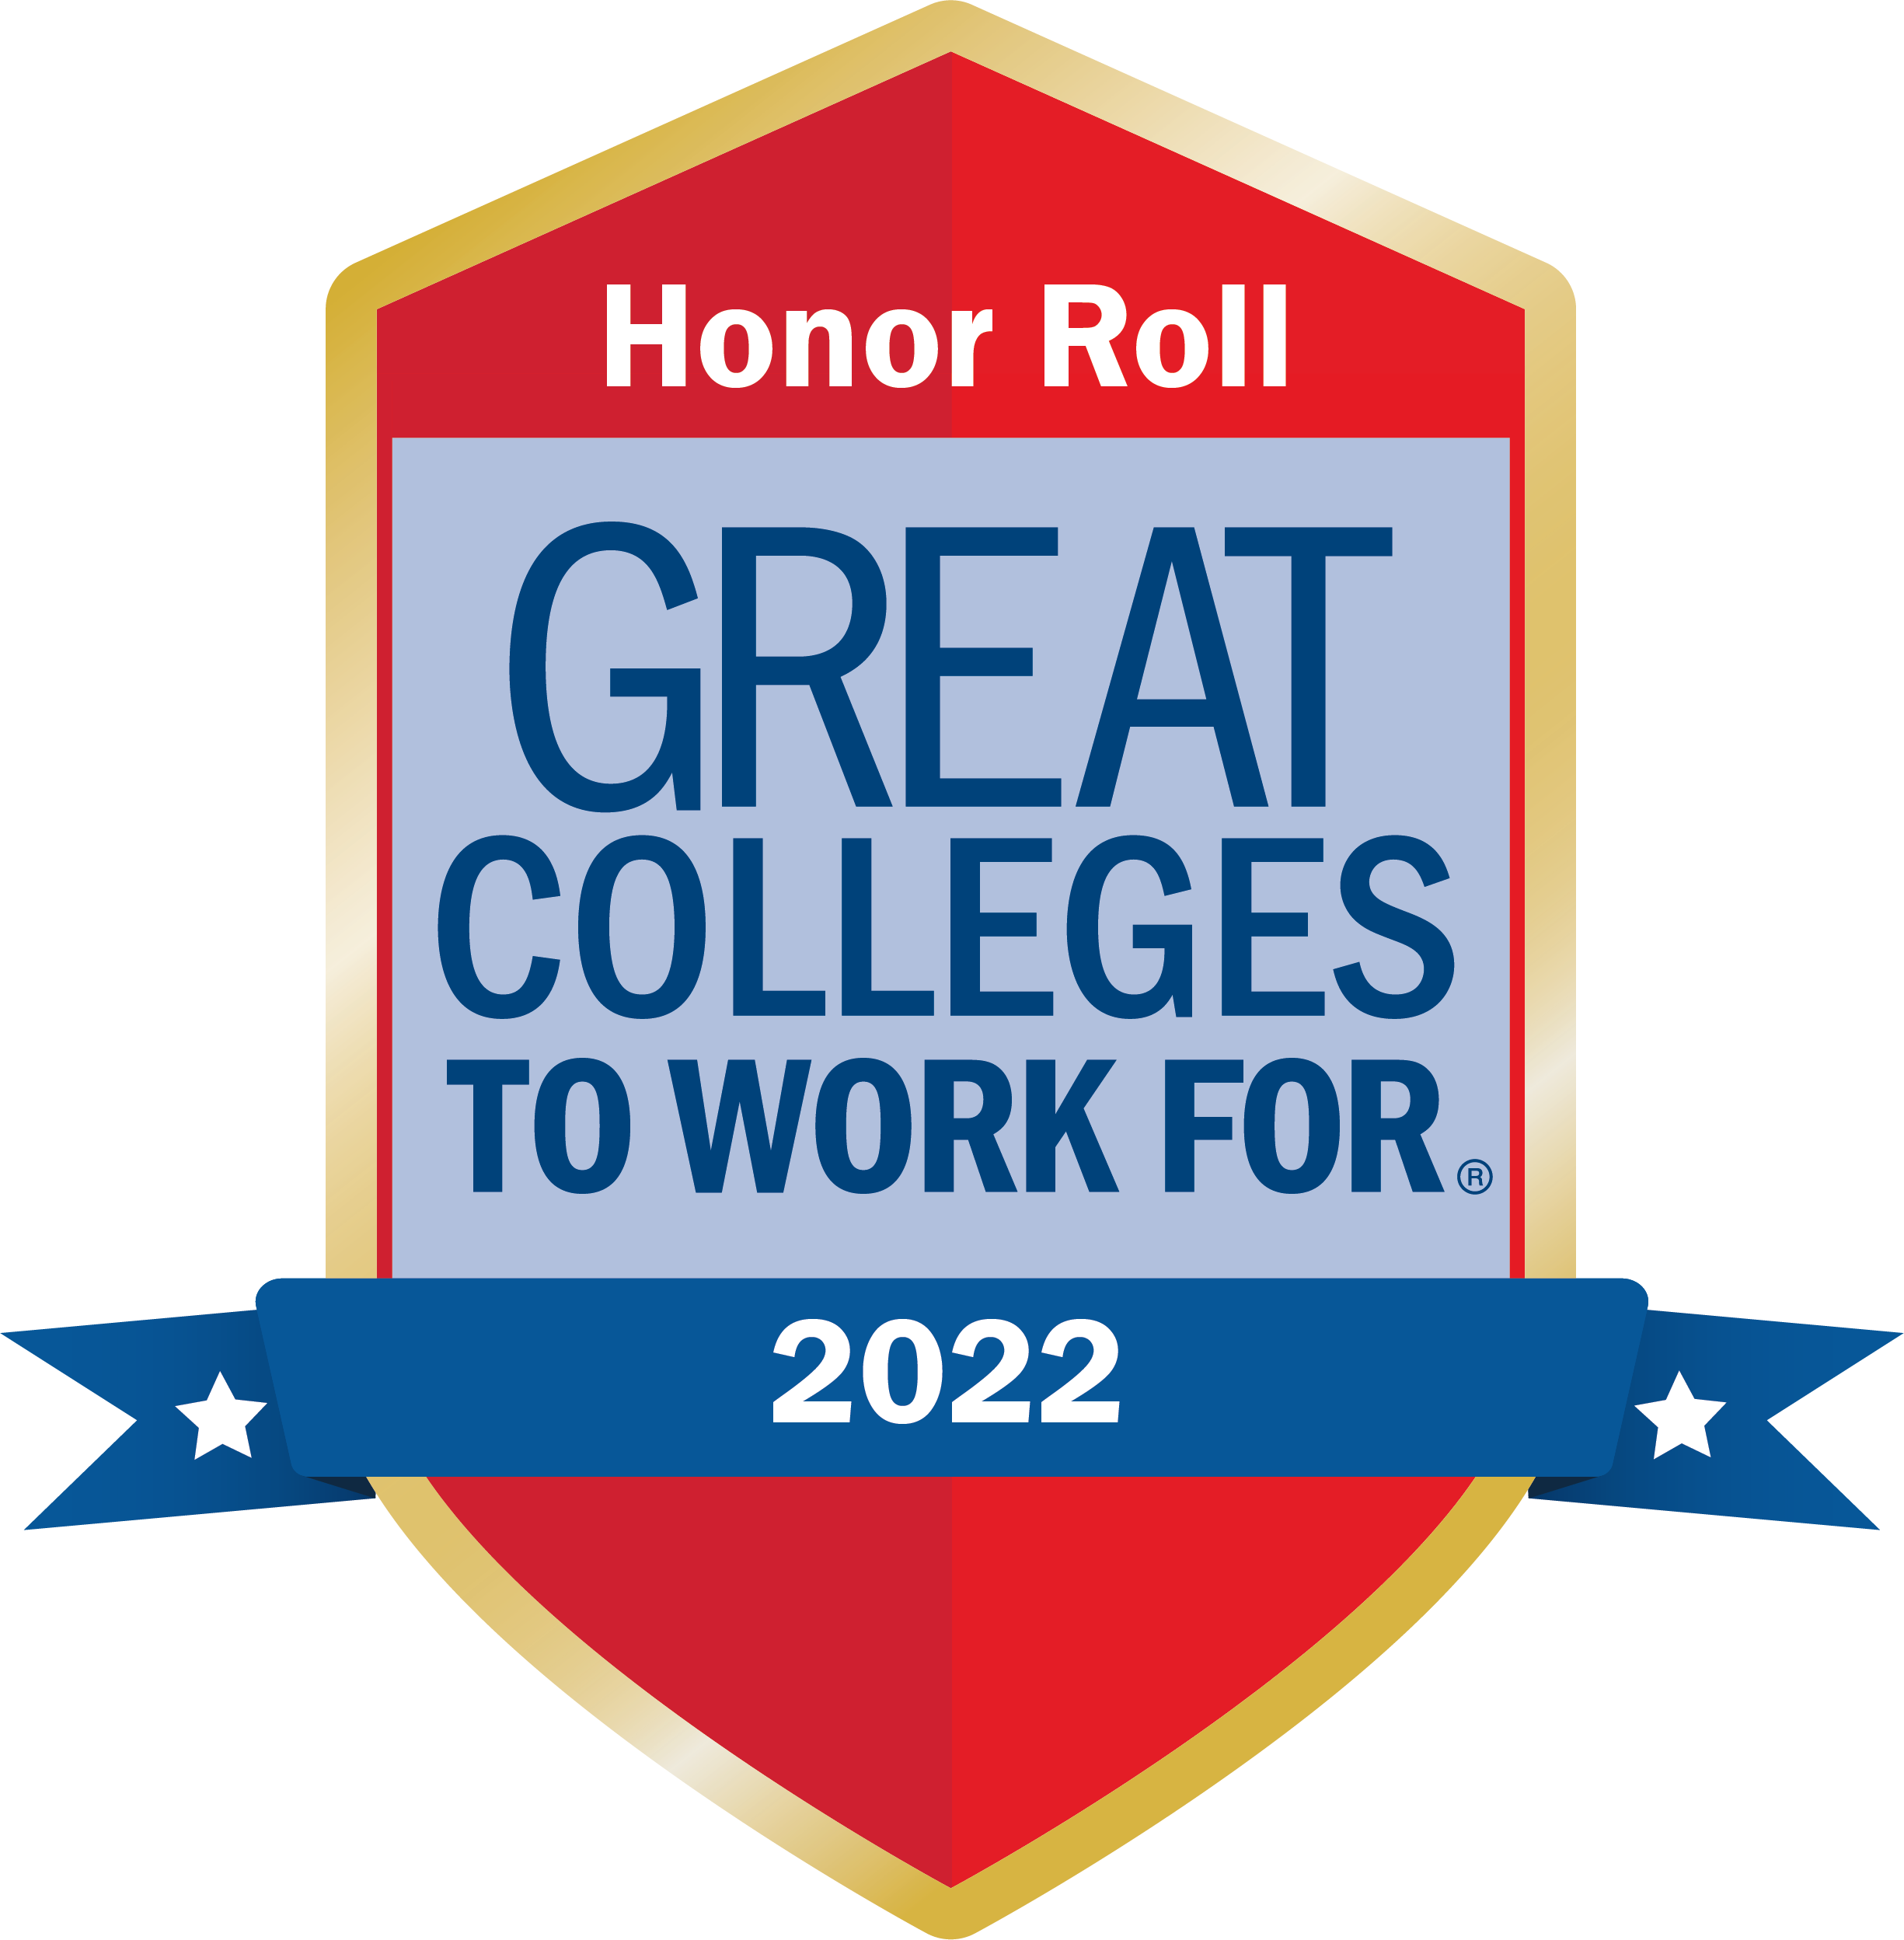 Great Colleges to Work For Honor Roll 2022